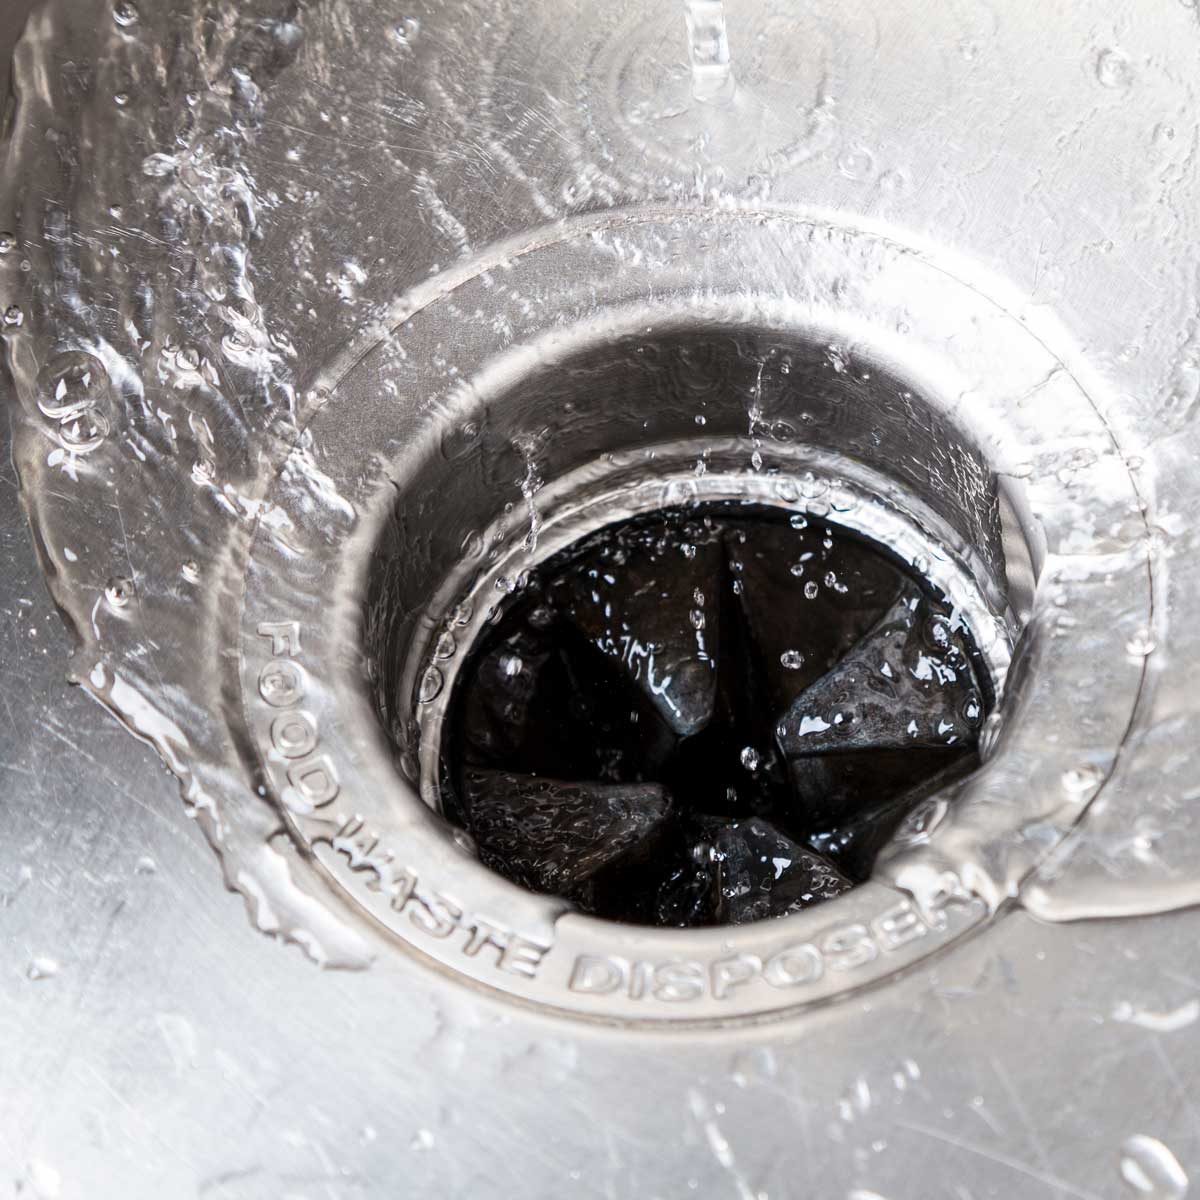 Do You Have to Run Water While Using the Garbage Disposal?